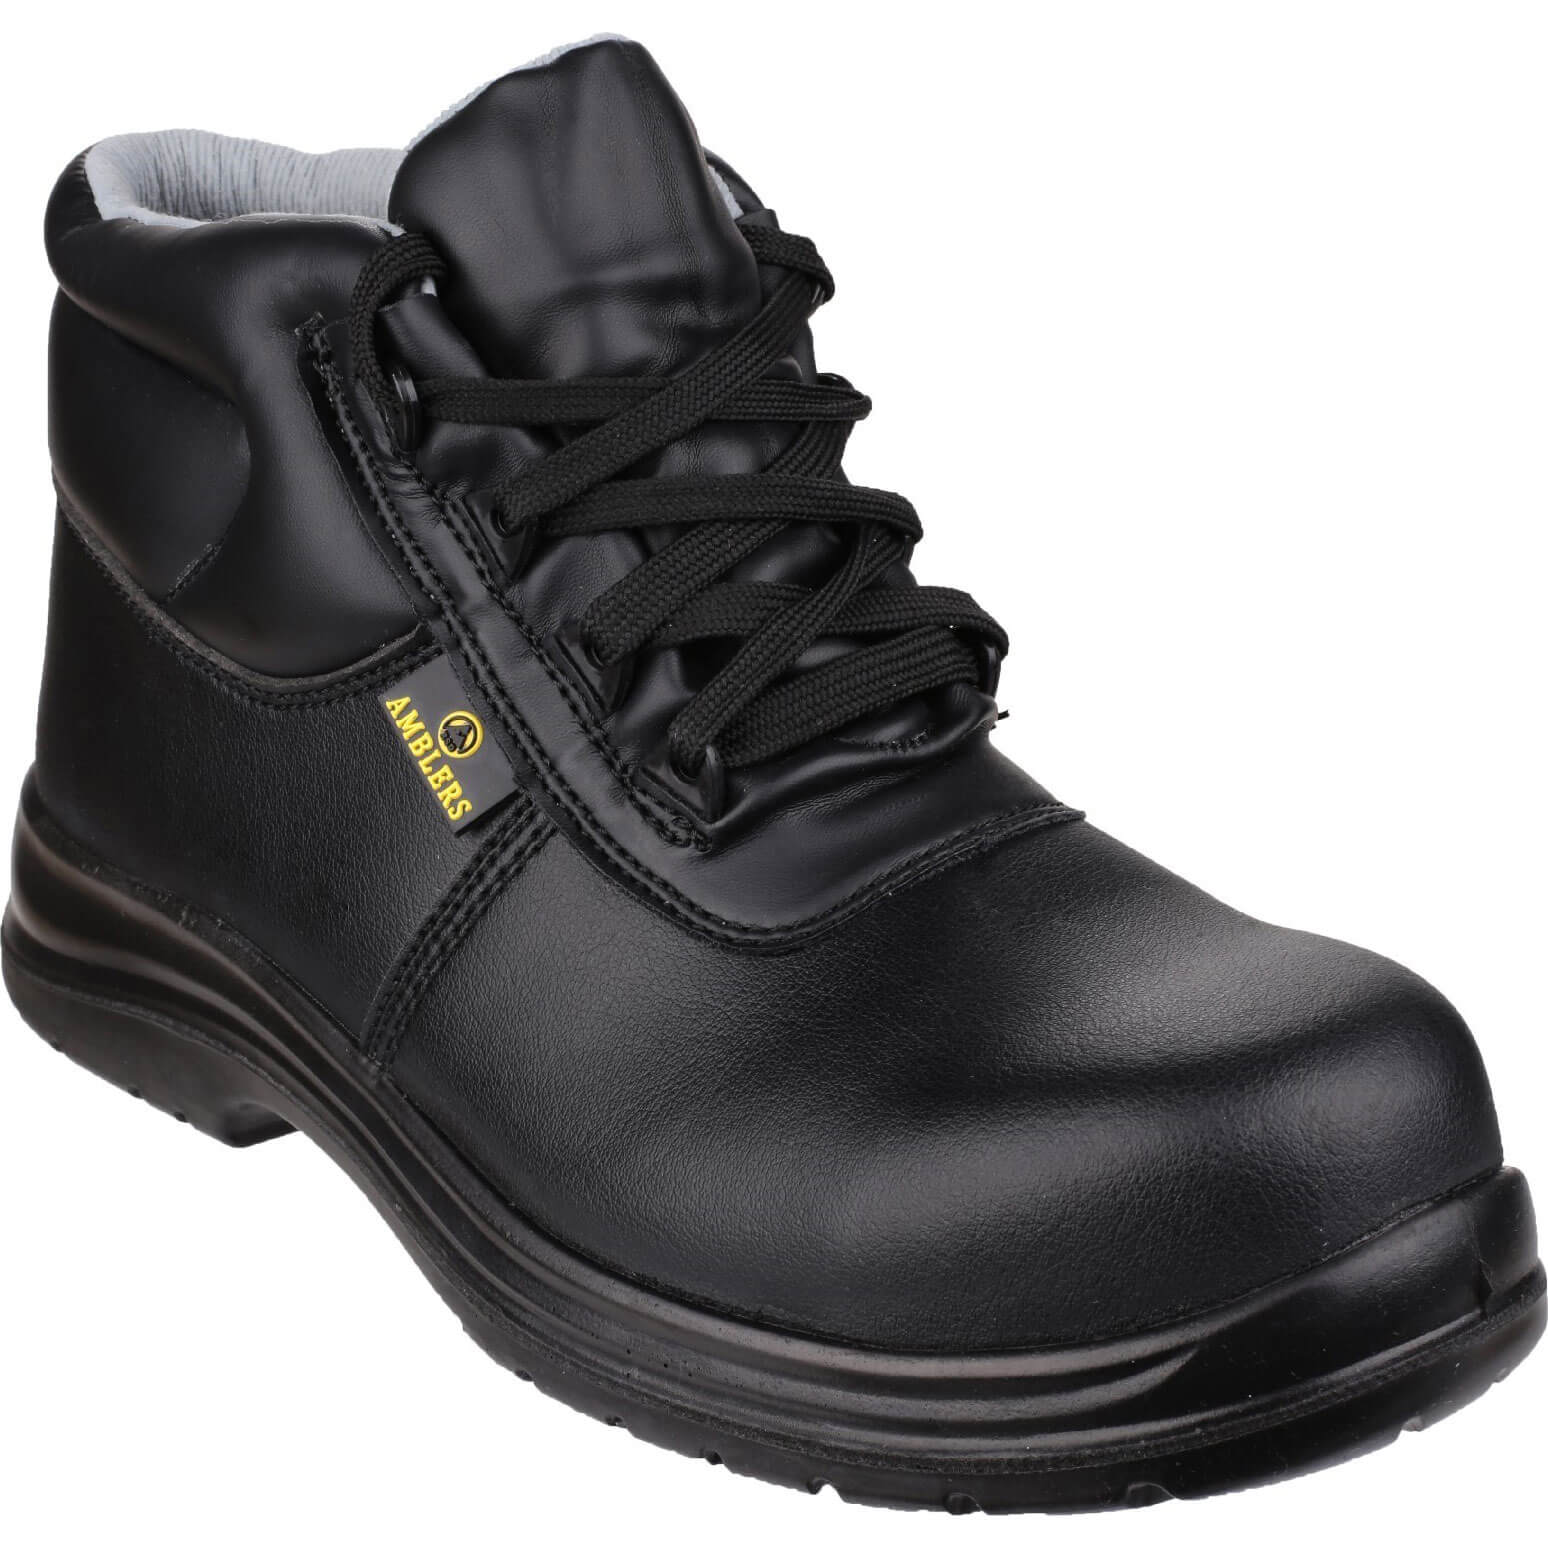 Photo of Amblers Mens Safety Fs663 Metal-free Water-resistant Safety Boots Black Size 9